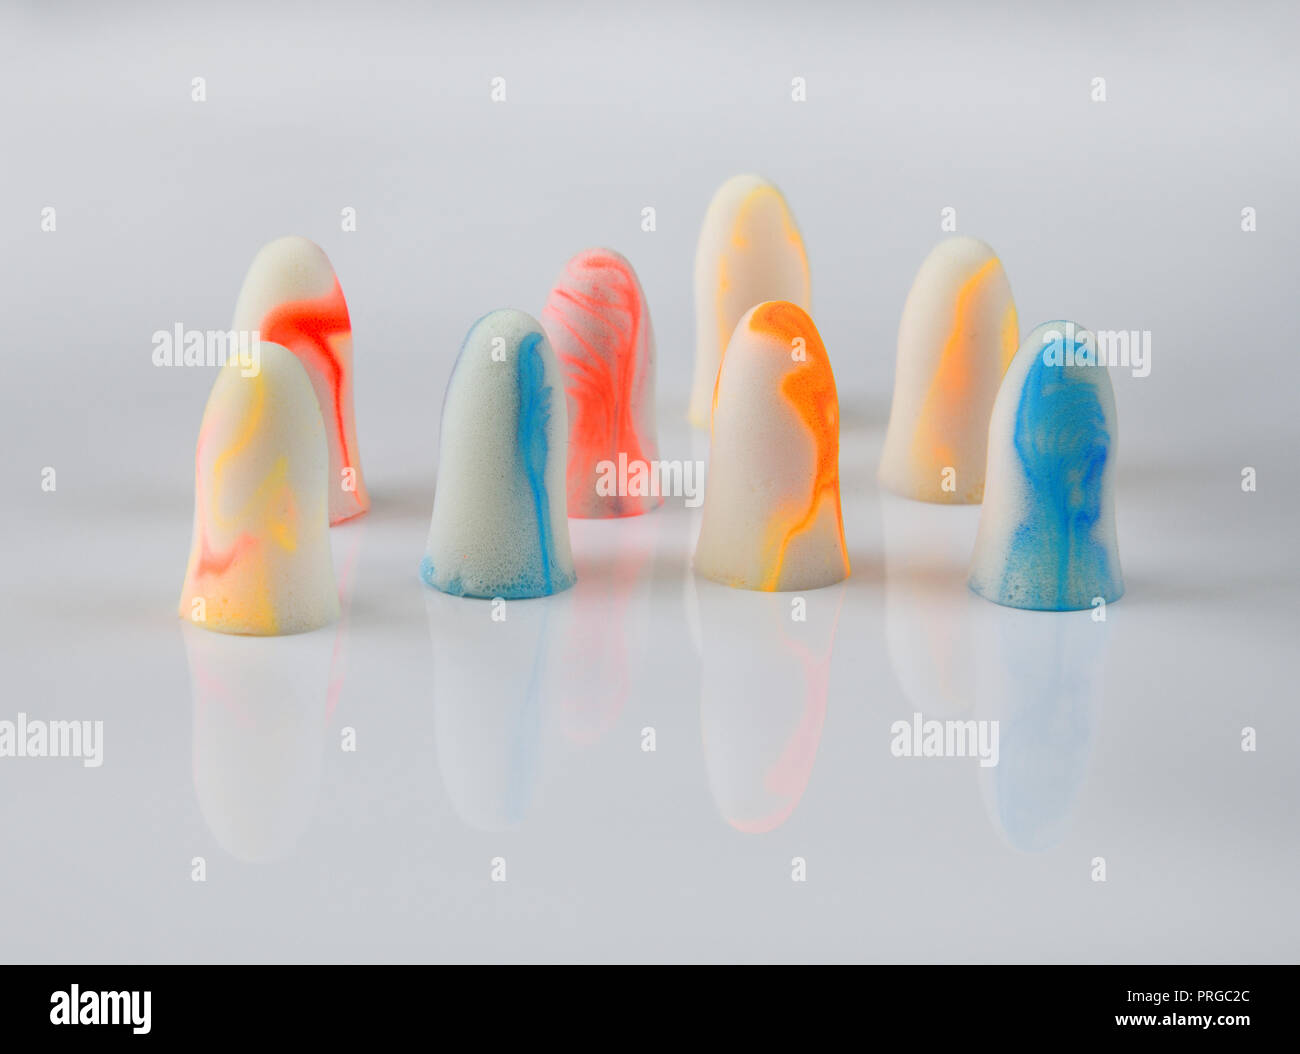 several earplugs on a white background Stock Photo